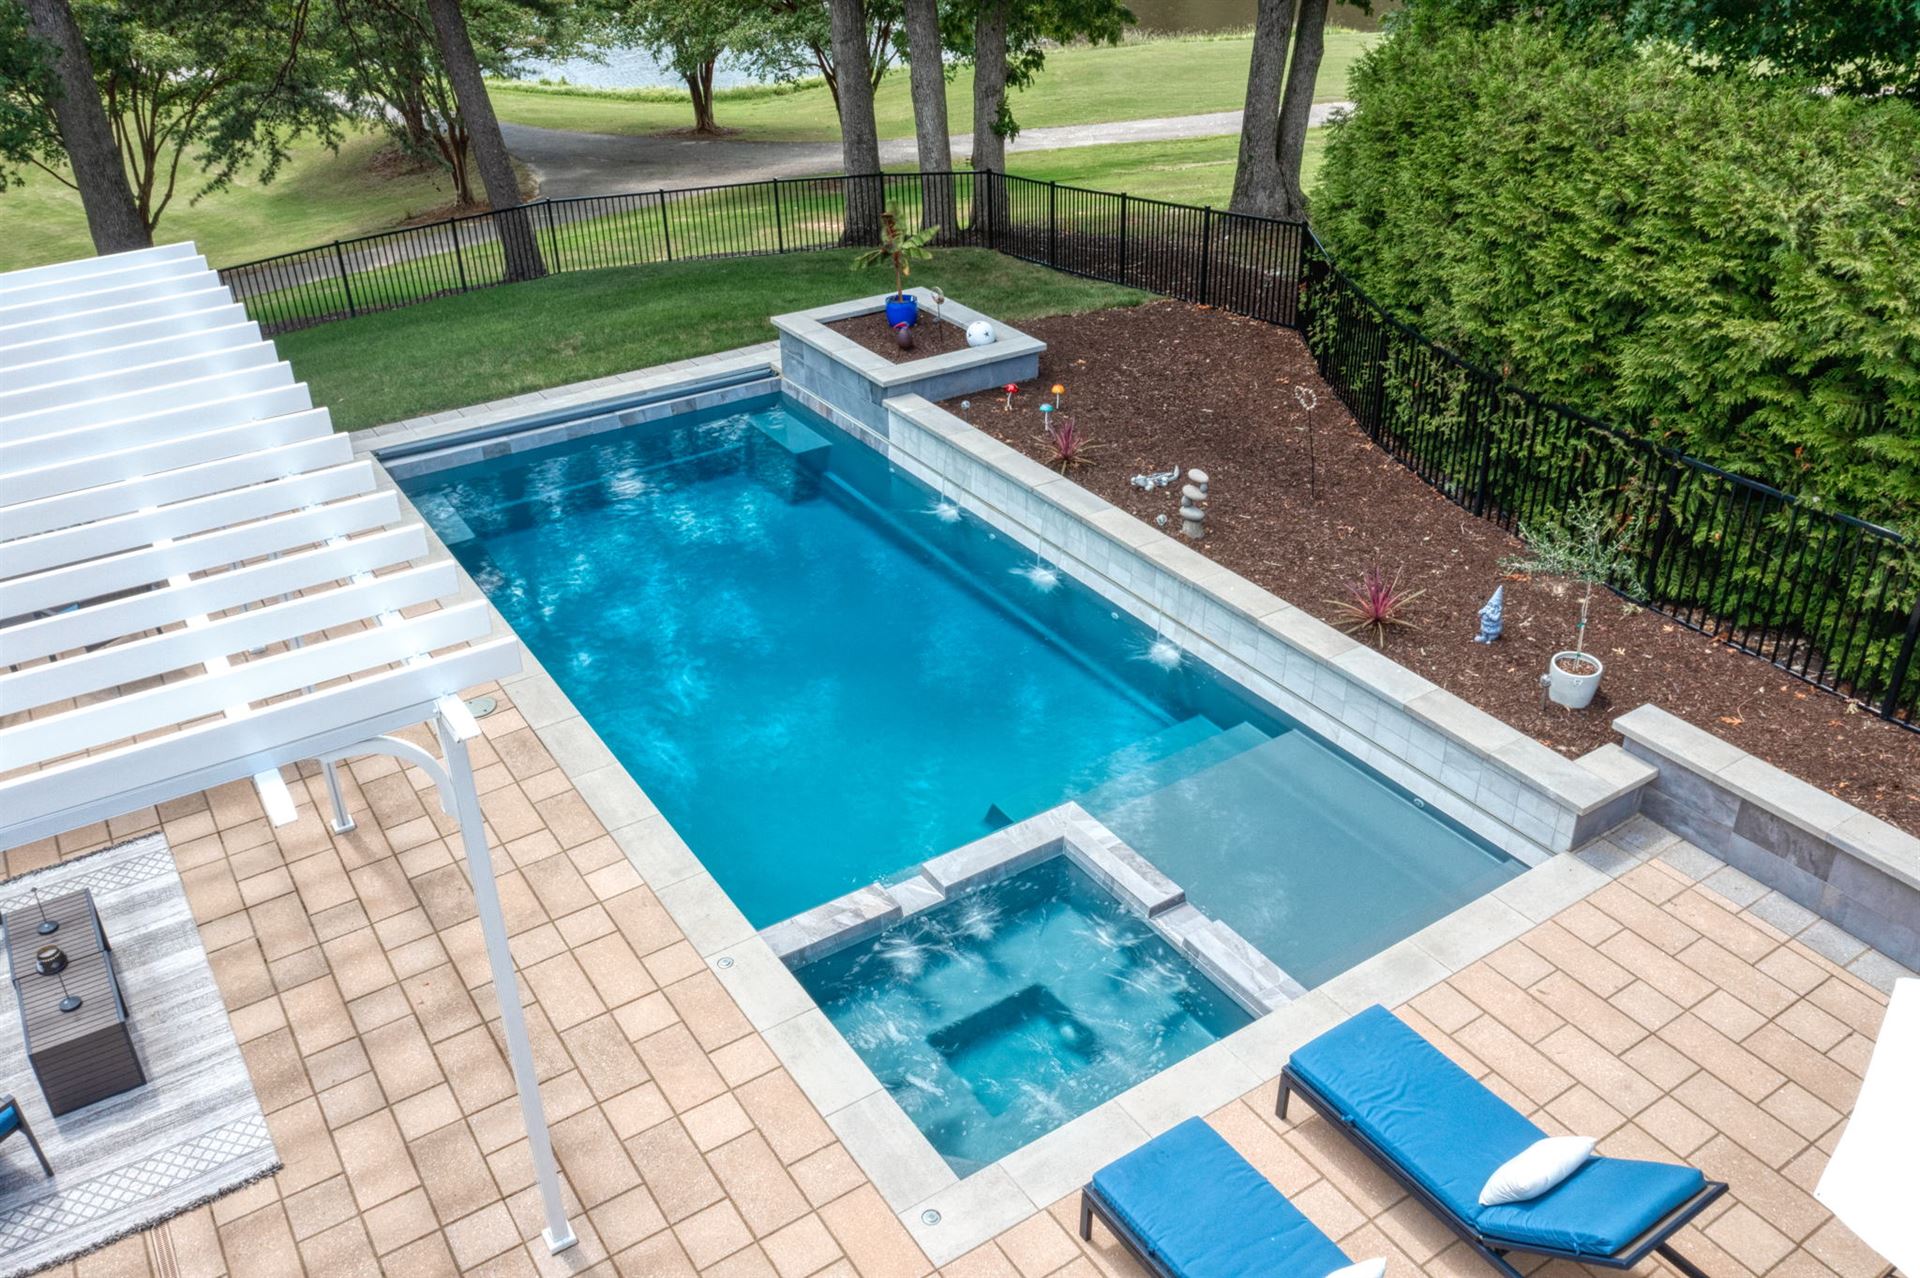 River Pools X36 in Granite Gray with cascade, concrete paver patio, and natural stone coping